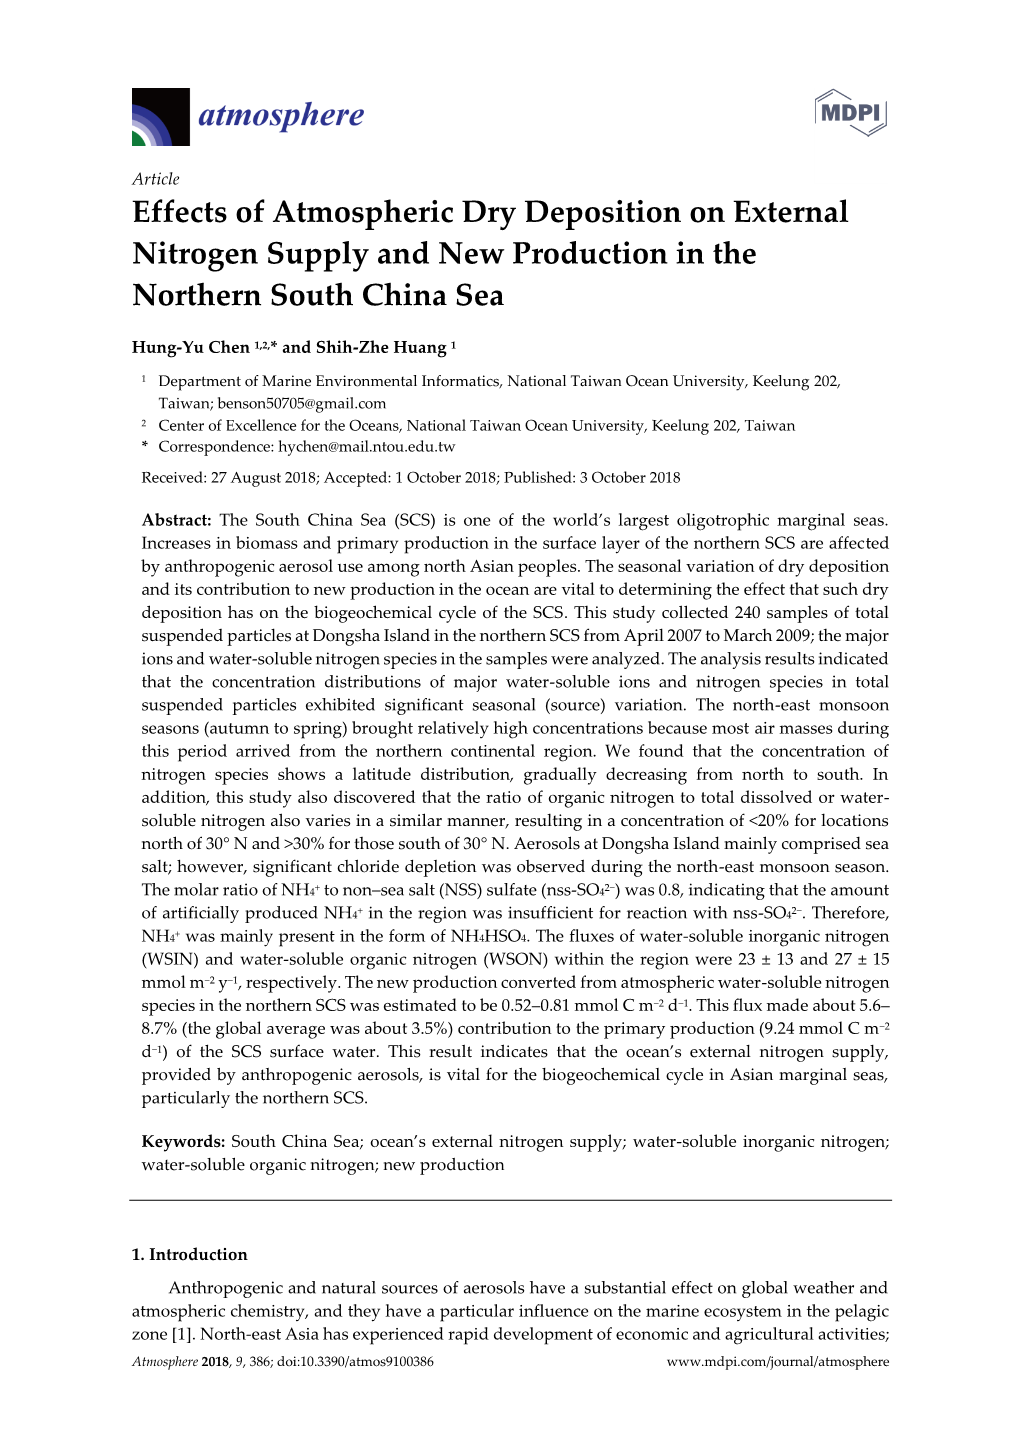 Effects of Atmospheric Dry Deposition on External Nitrogen Supply and New Production in the Northern South China Sea